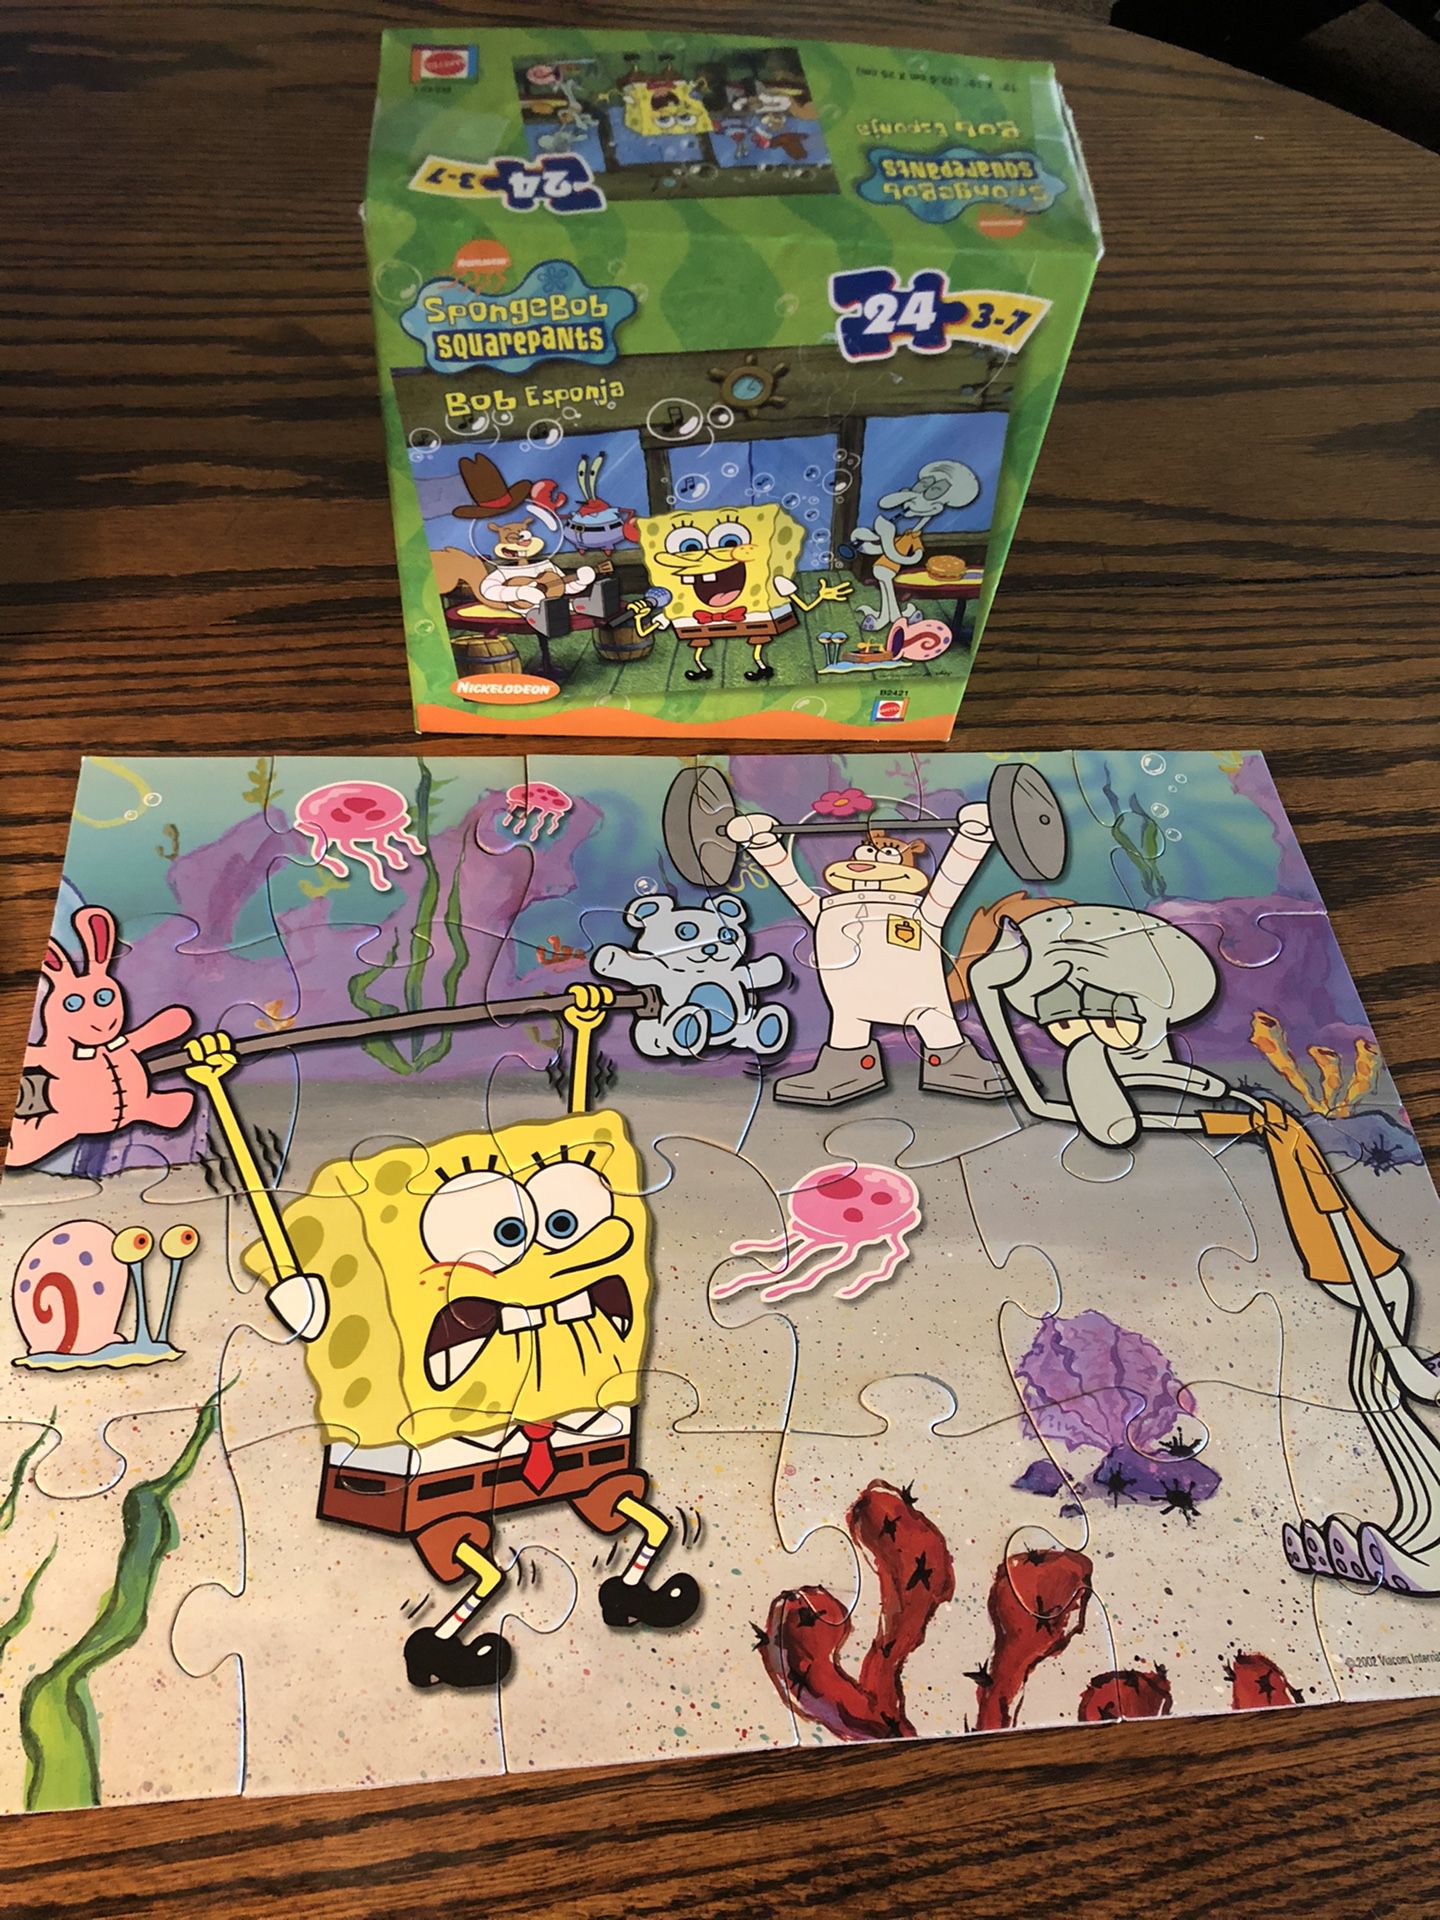 Soongebob puzzle with sandy, Gary, jelly fish and squidward in Bikini Bottom - fun for children! family game night!